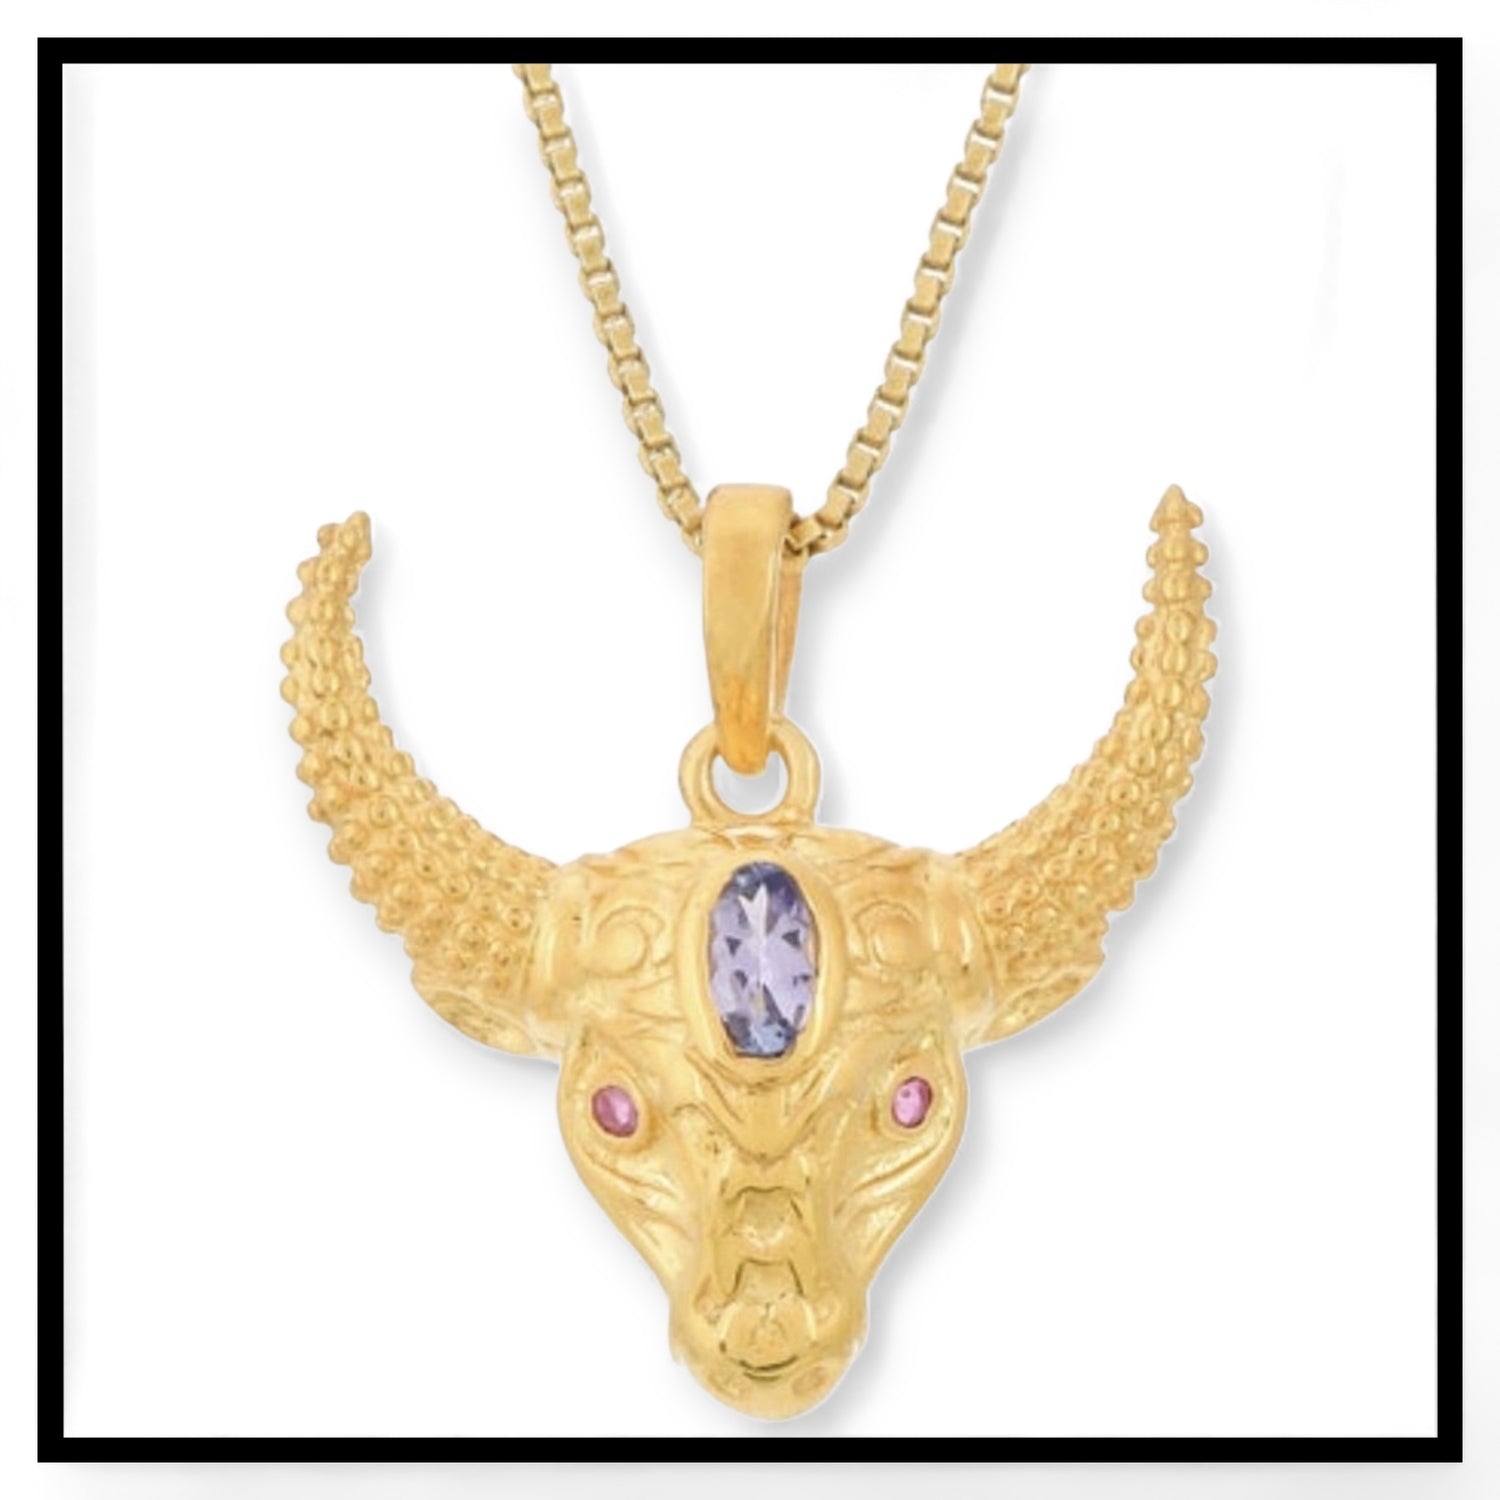 Gold Vermeil & 925 sterling silver jewellery collections at Twelve Silver Trees Jewellery & Gifts